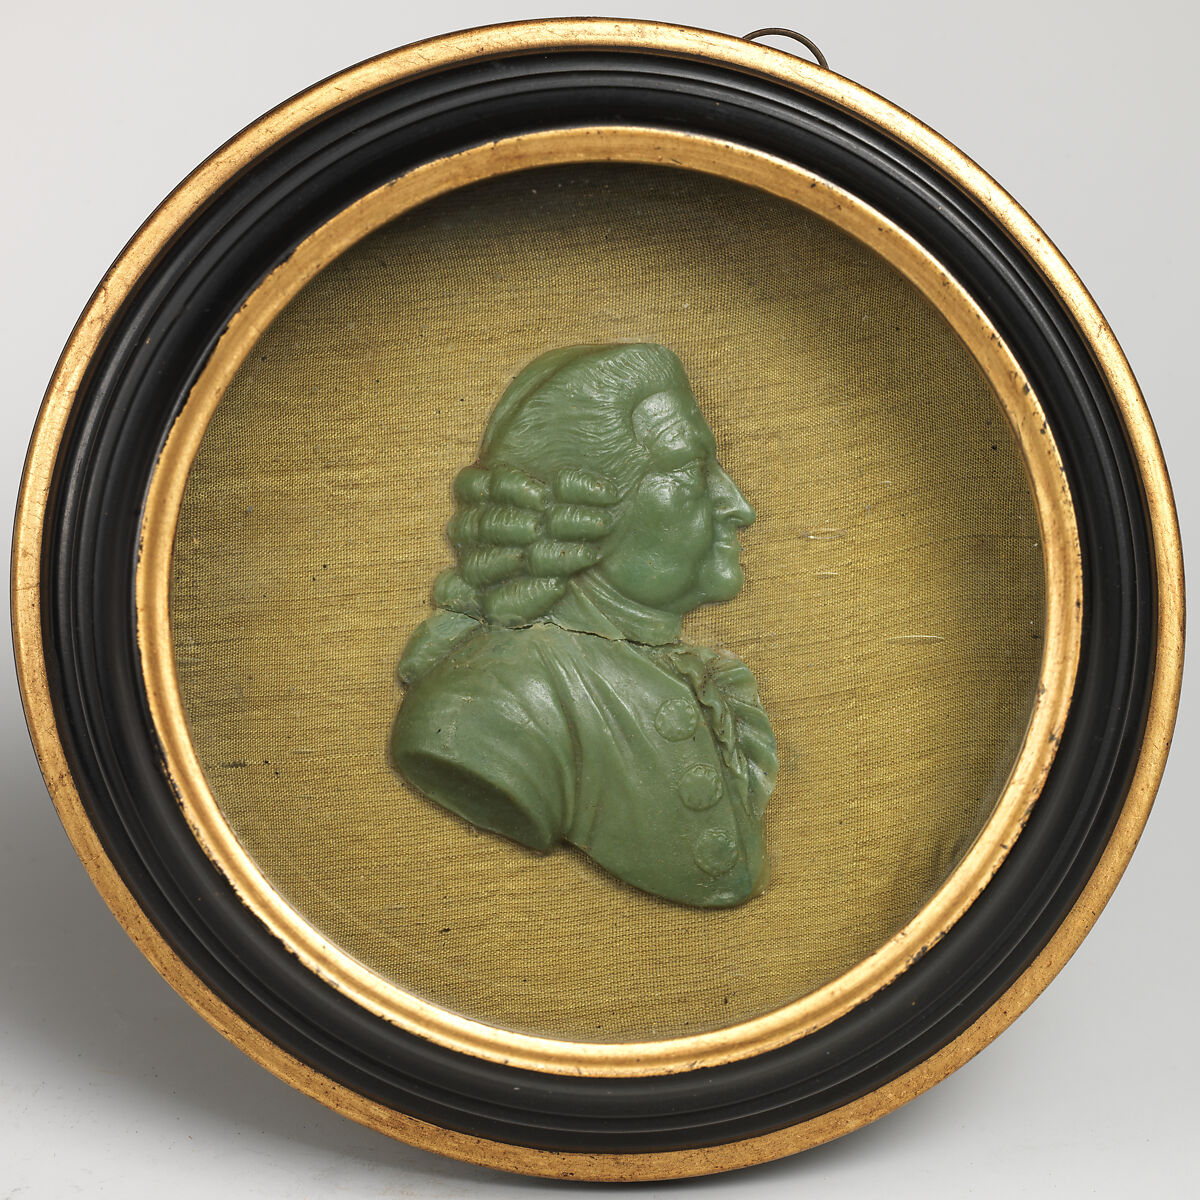 Portrait of a Man (Mirabeau, 1749–1791), Medallion: green wax on olive silk ground; shadow box: black wood with gilt inner and outer moldings, framed with glass, British or French 